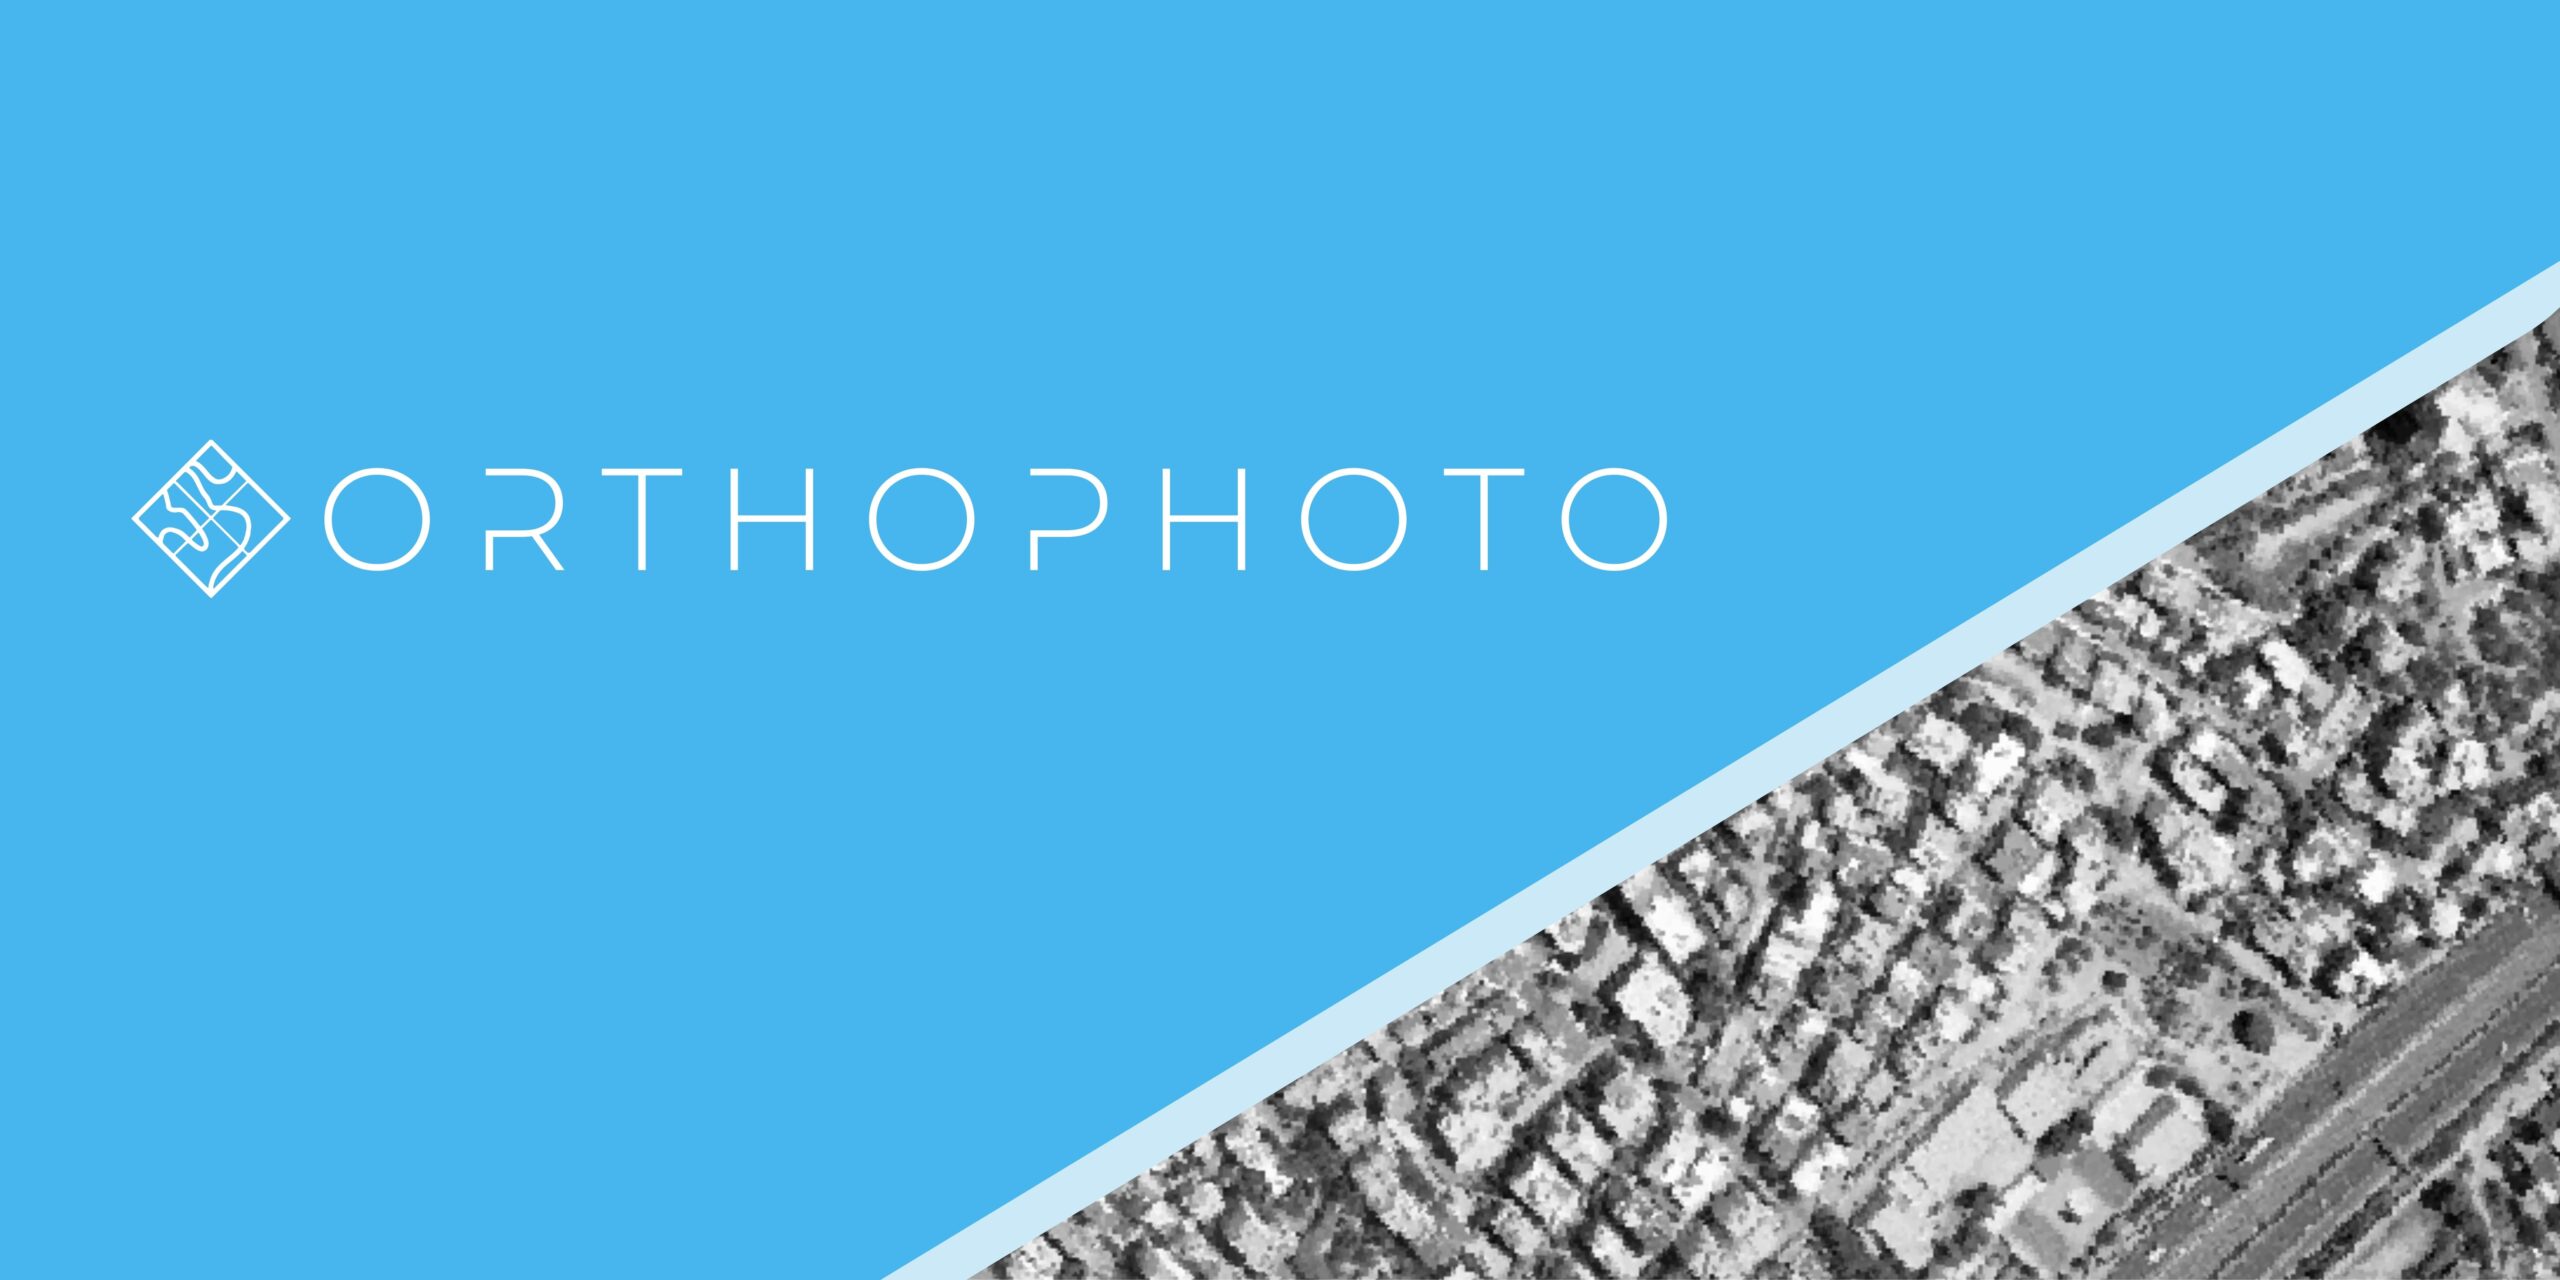 OrthoPhoto.io Basic Training 5: Final Output Creation and Payments